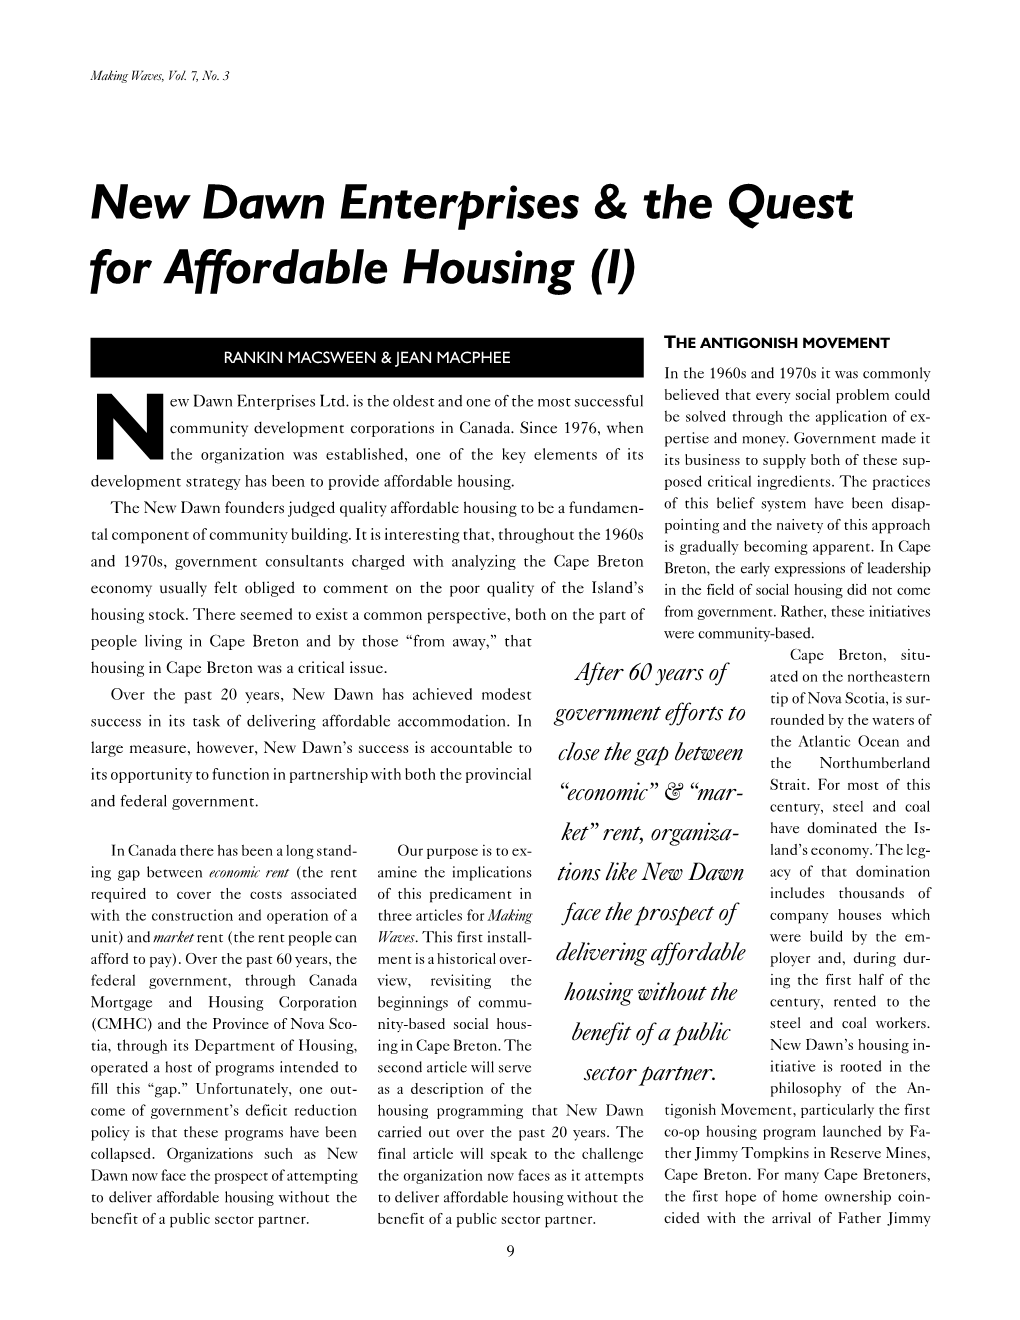 New Dawn Enterprises & the Quest for Affordable Housing